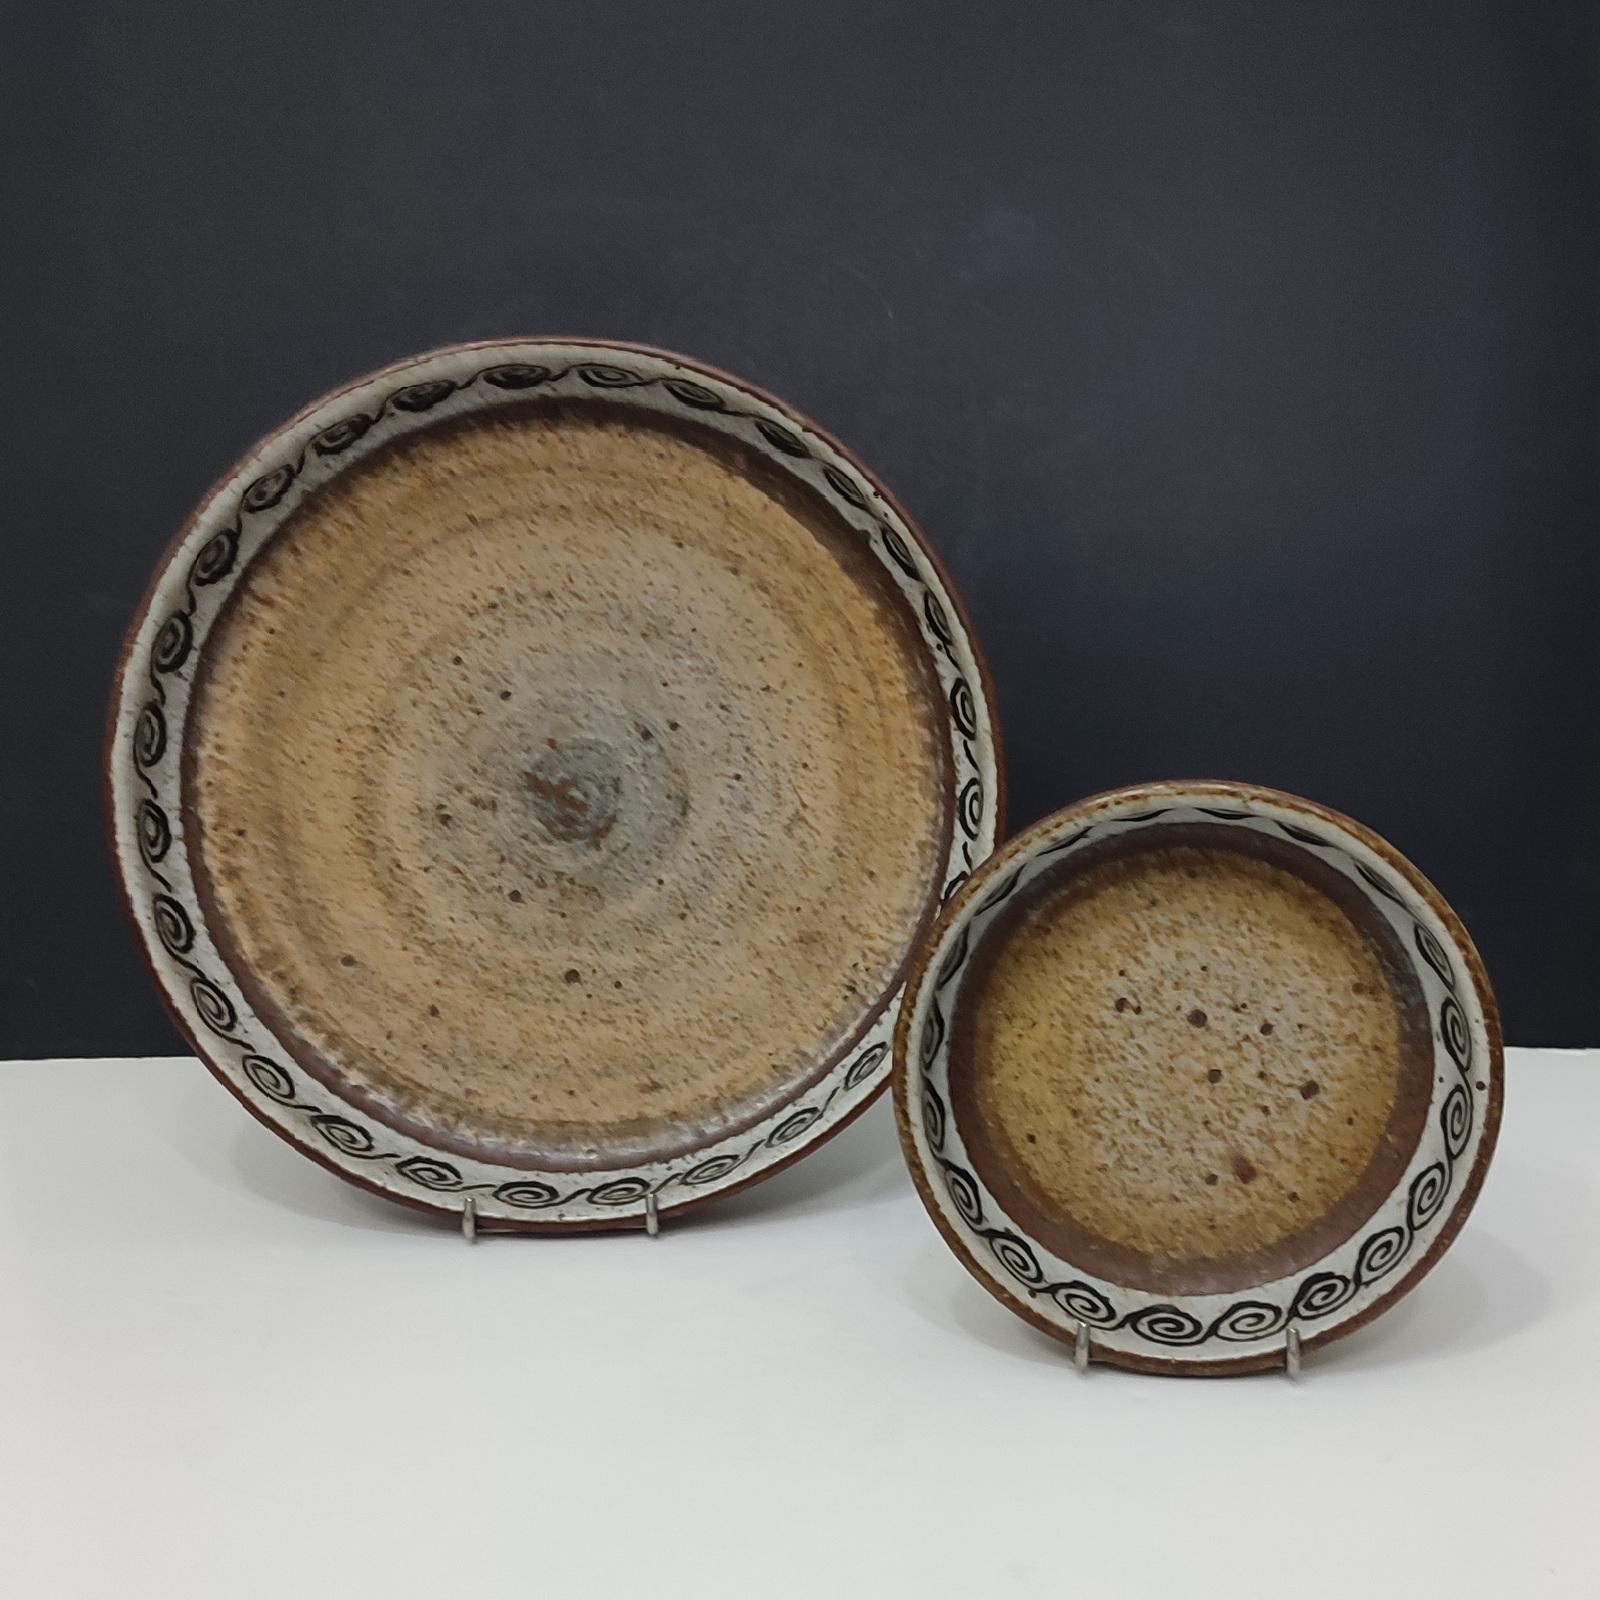 A set of two modernist stoneware bowls designed by the Drejargruppen collective for Rörstrand 1974.
Dimensions:
Diameter 30cm and 17 cm.
Each marked on the bottom 